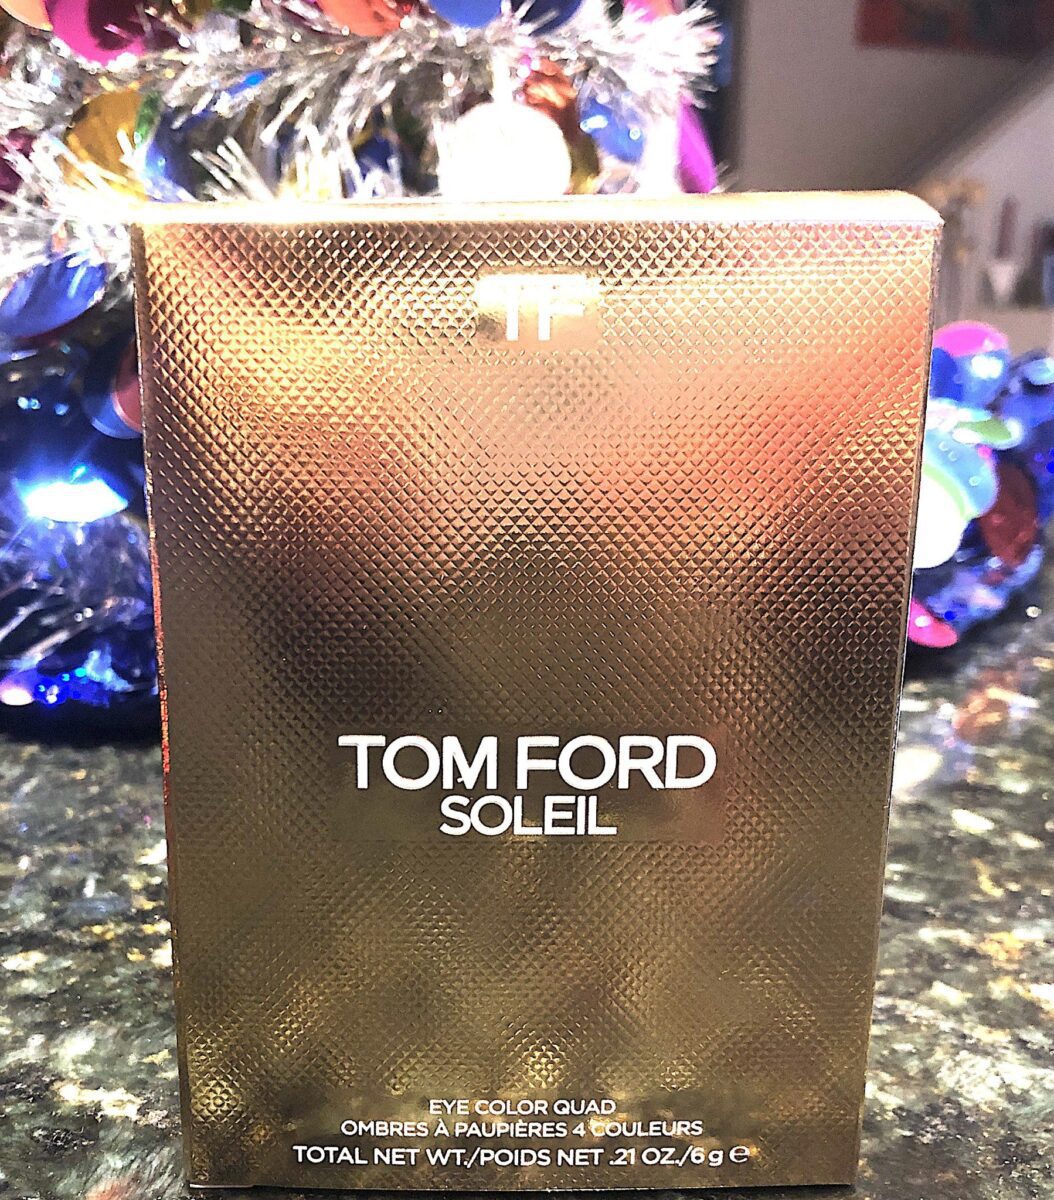 TOM FORD SOLEIL NEIGE 01 OUTER PACKAGING BOX